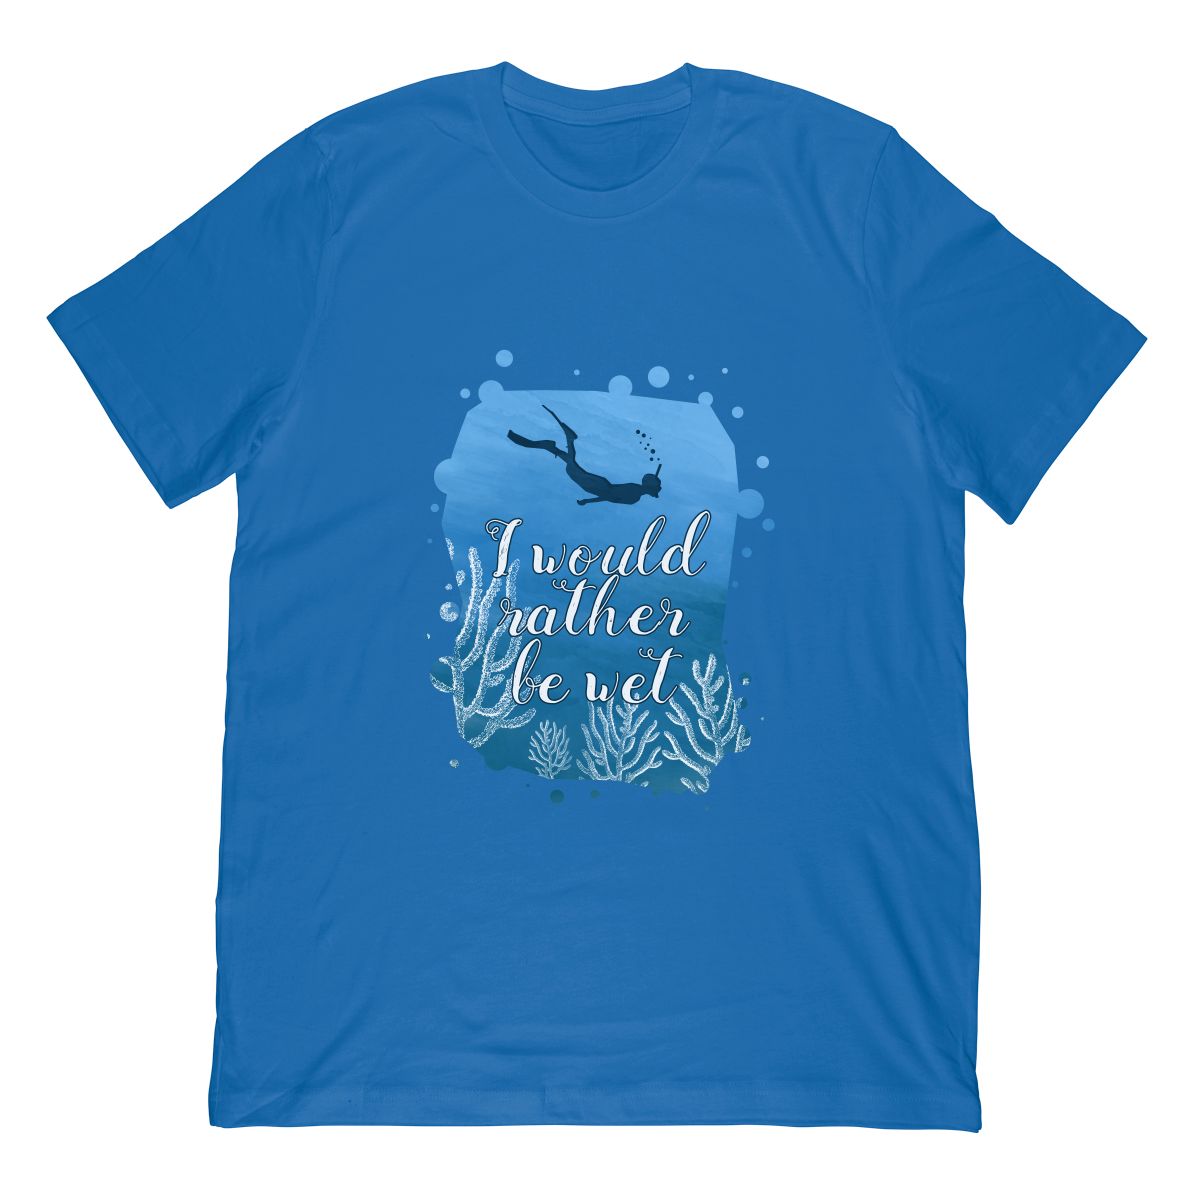 Snorkeling Shirt I Would Rather Be Wet